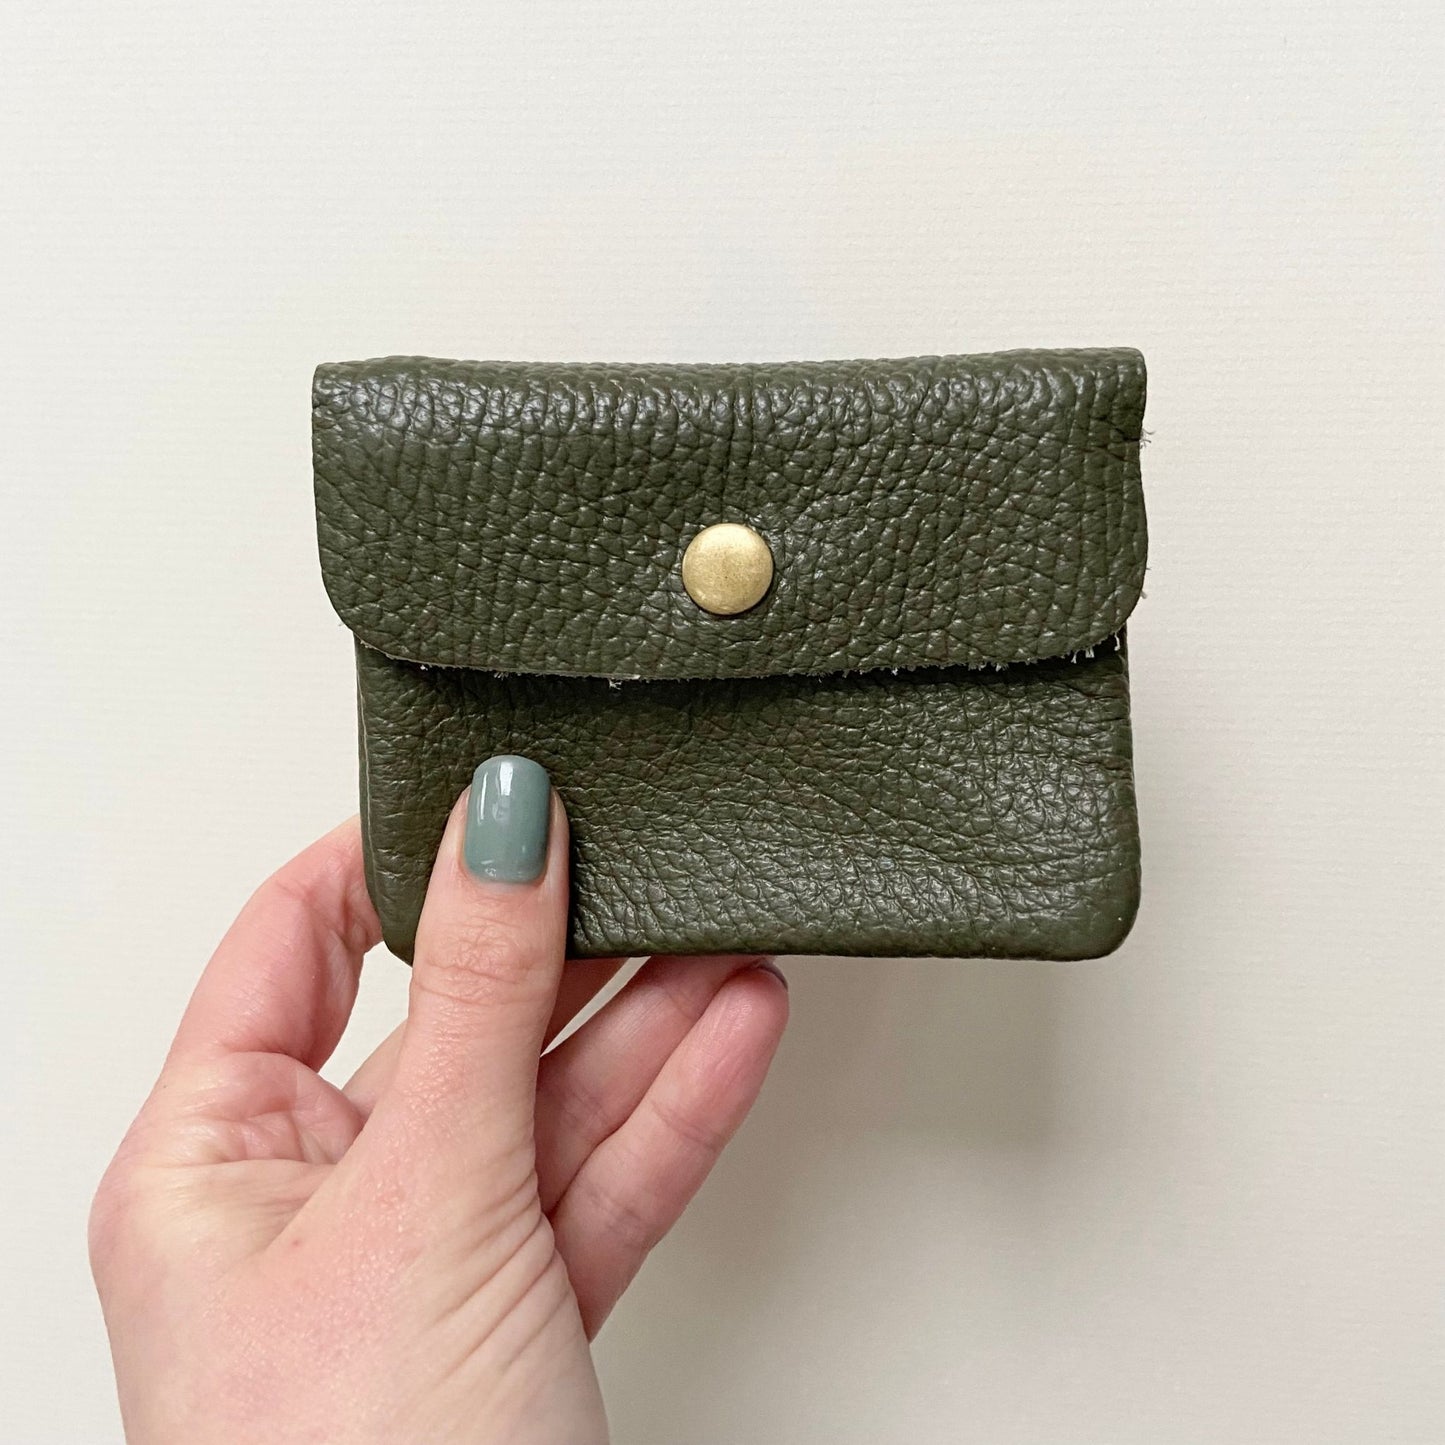 Green leather purse